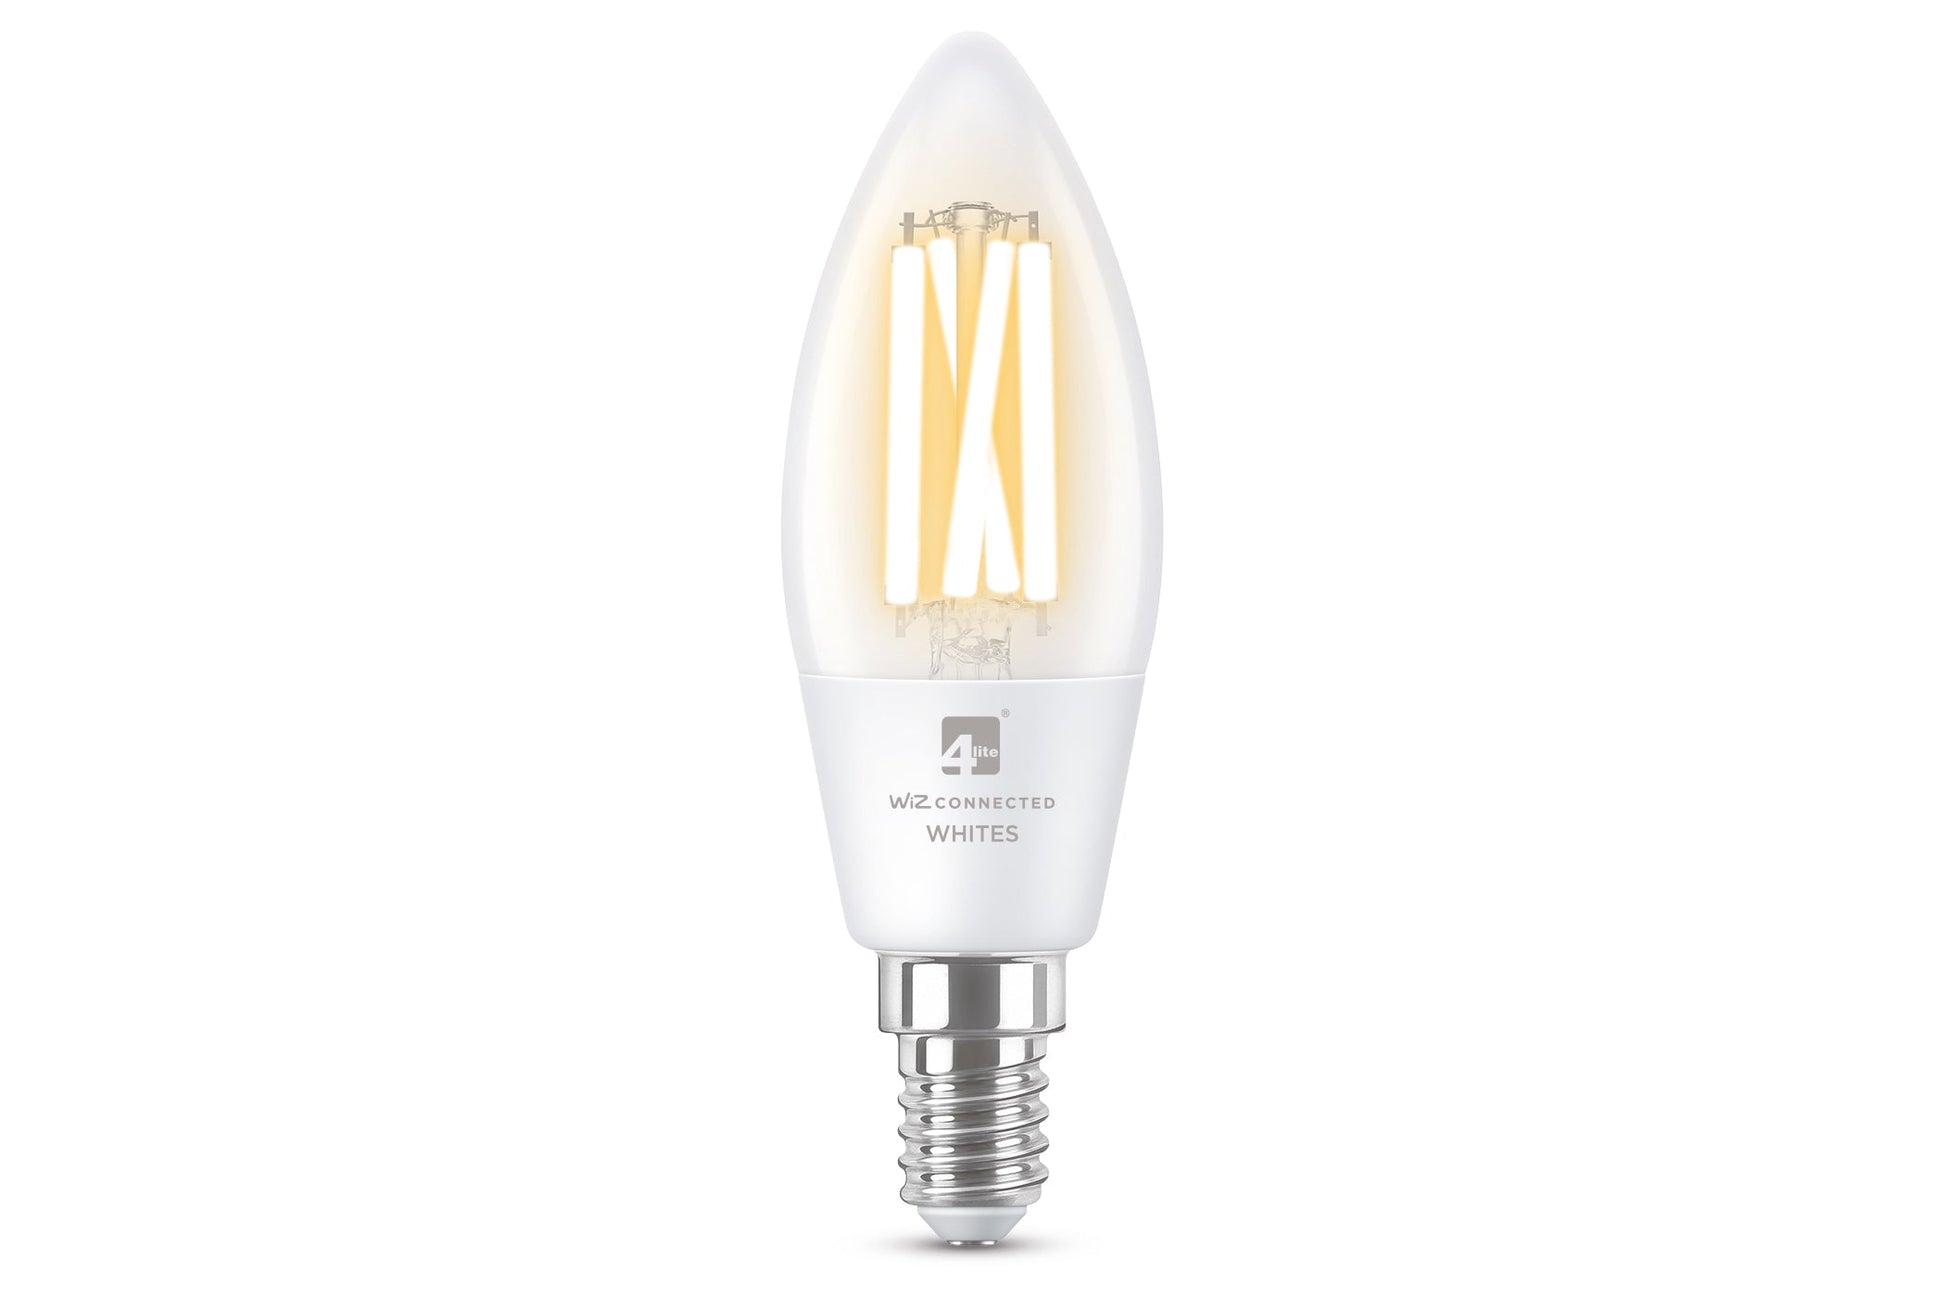 4lite WiZ Connected C35 Candle Filament White WiFi LED Smart Bulb